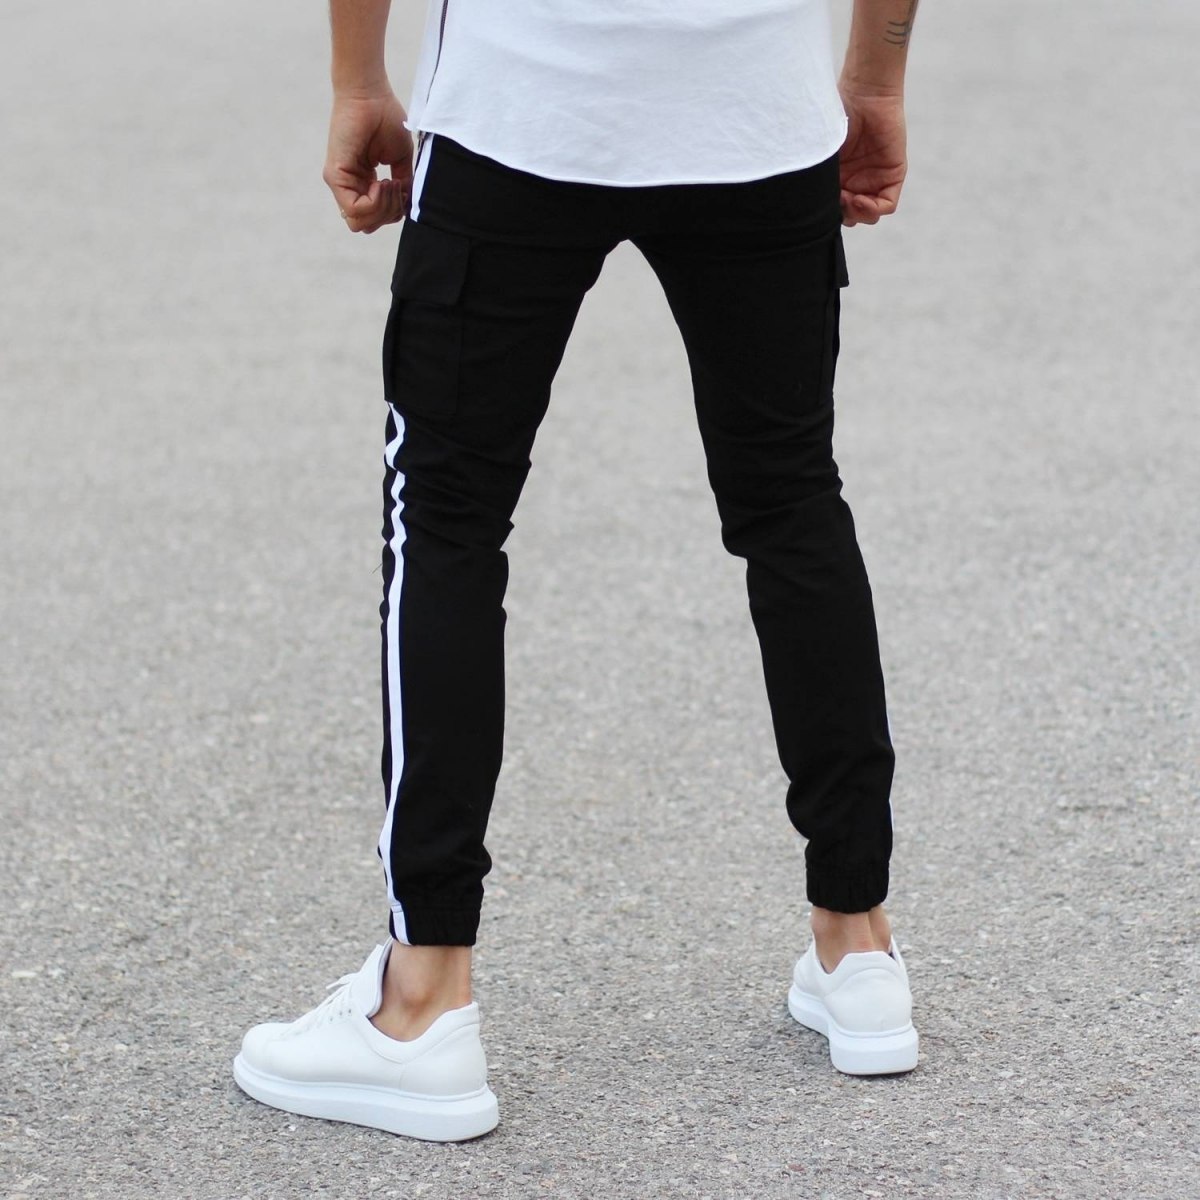 Black Pants With Large Pockets and Side-Stripes